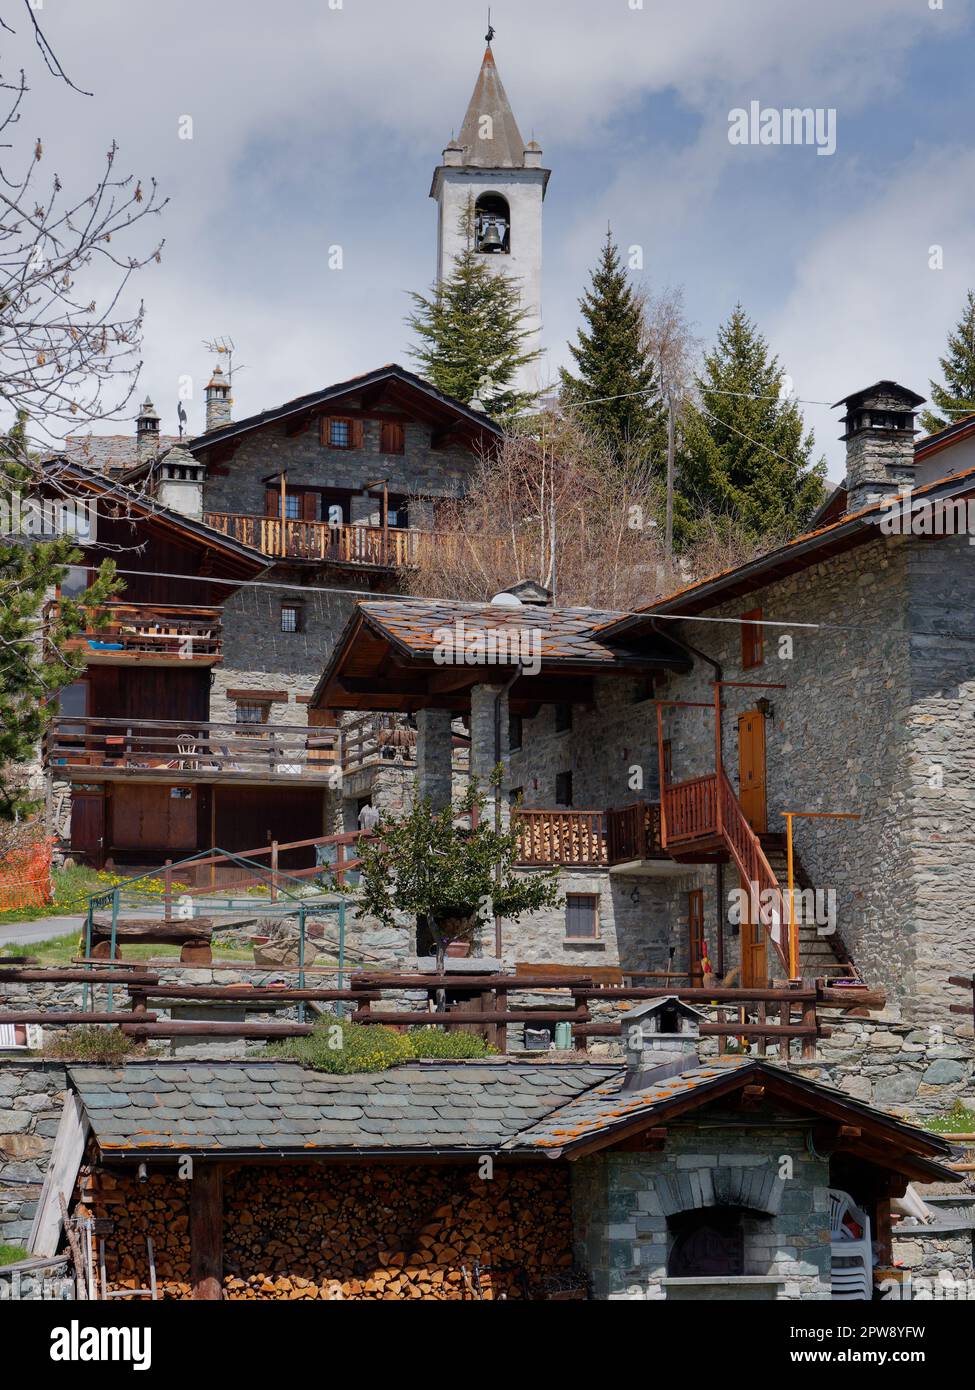 Traditional and quaint stone built houses with a wood stack in the foreground in the alpine town of Lignan in the Aosta Vally, NW Italy Stock Photo